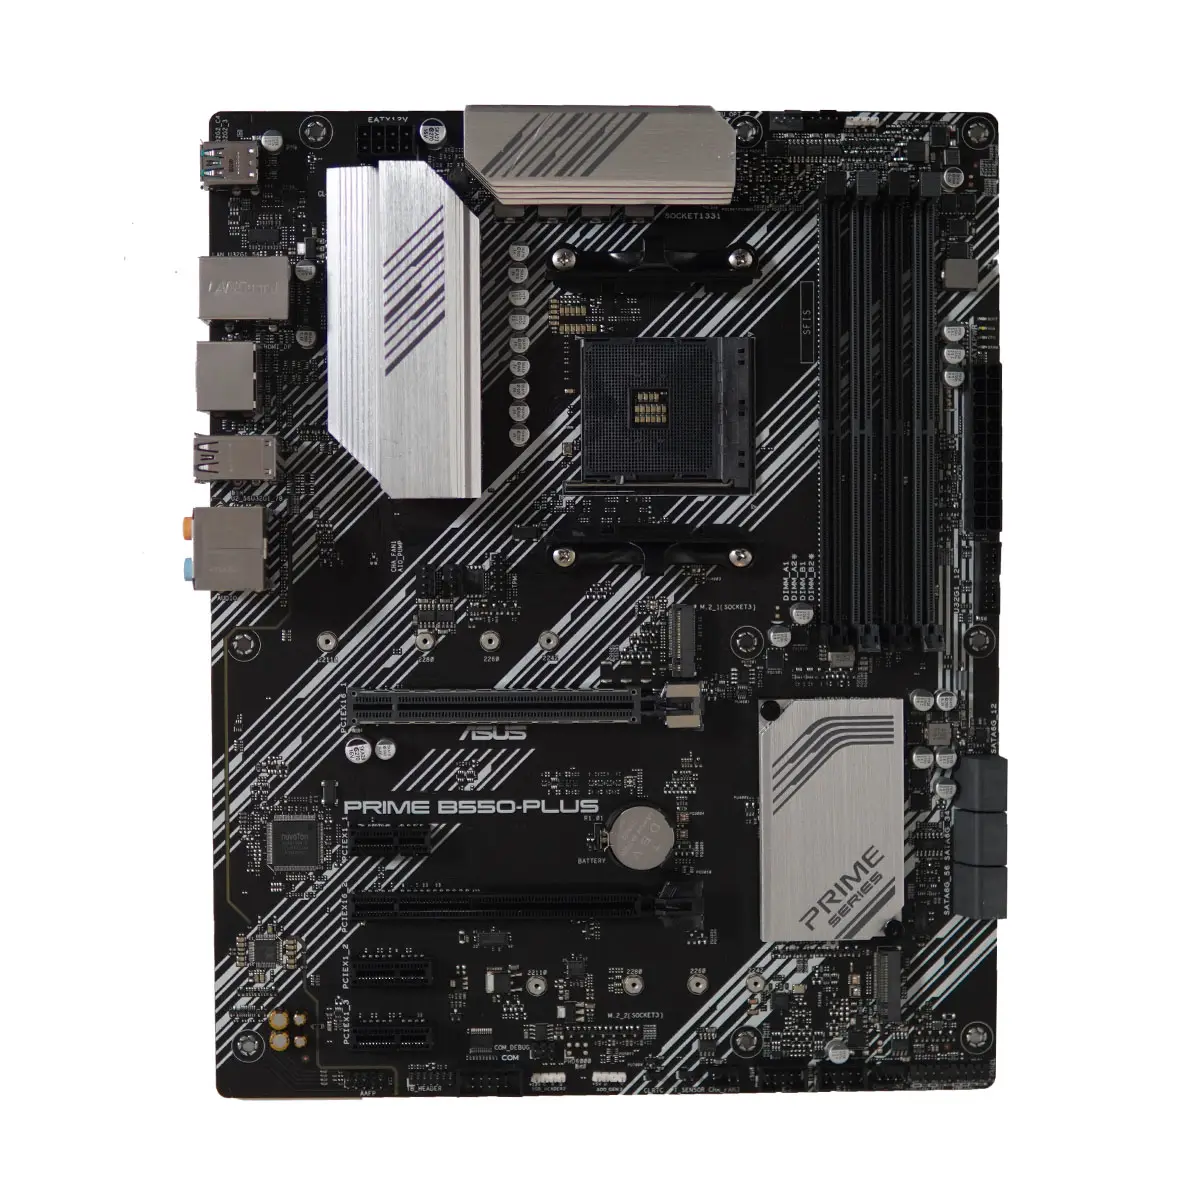 The New Listing Professional Computer Motherboard PRIME B550-PLUS AMD B550 Socket AM4 Motherboard